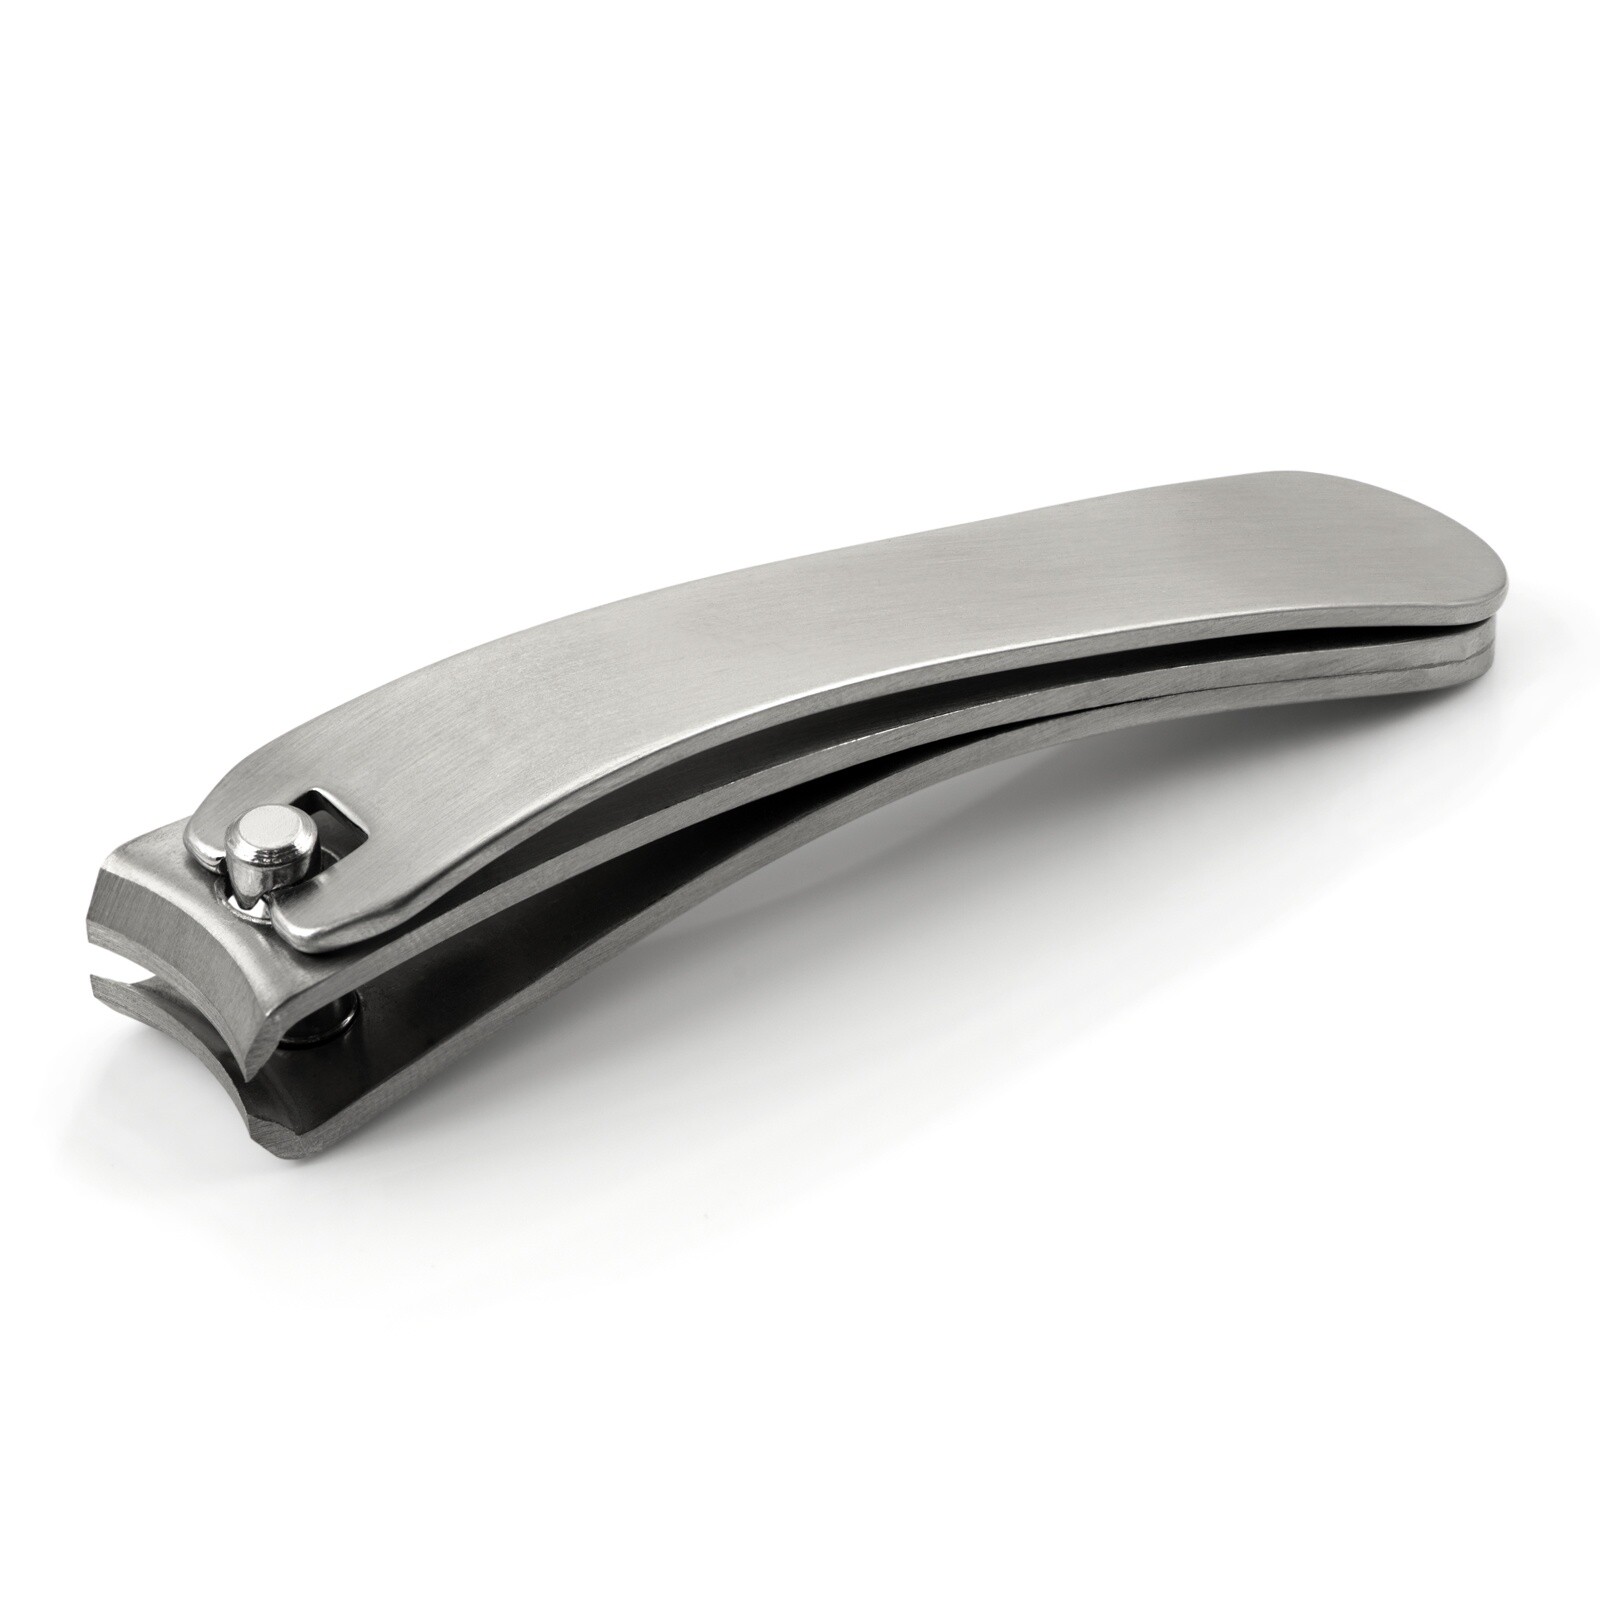 Giesen & Forsthoff's Timor Large Bent Nail Clippers, Stainless Steel - Mont  bleu Store